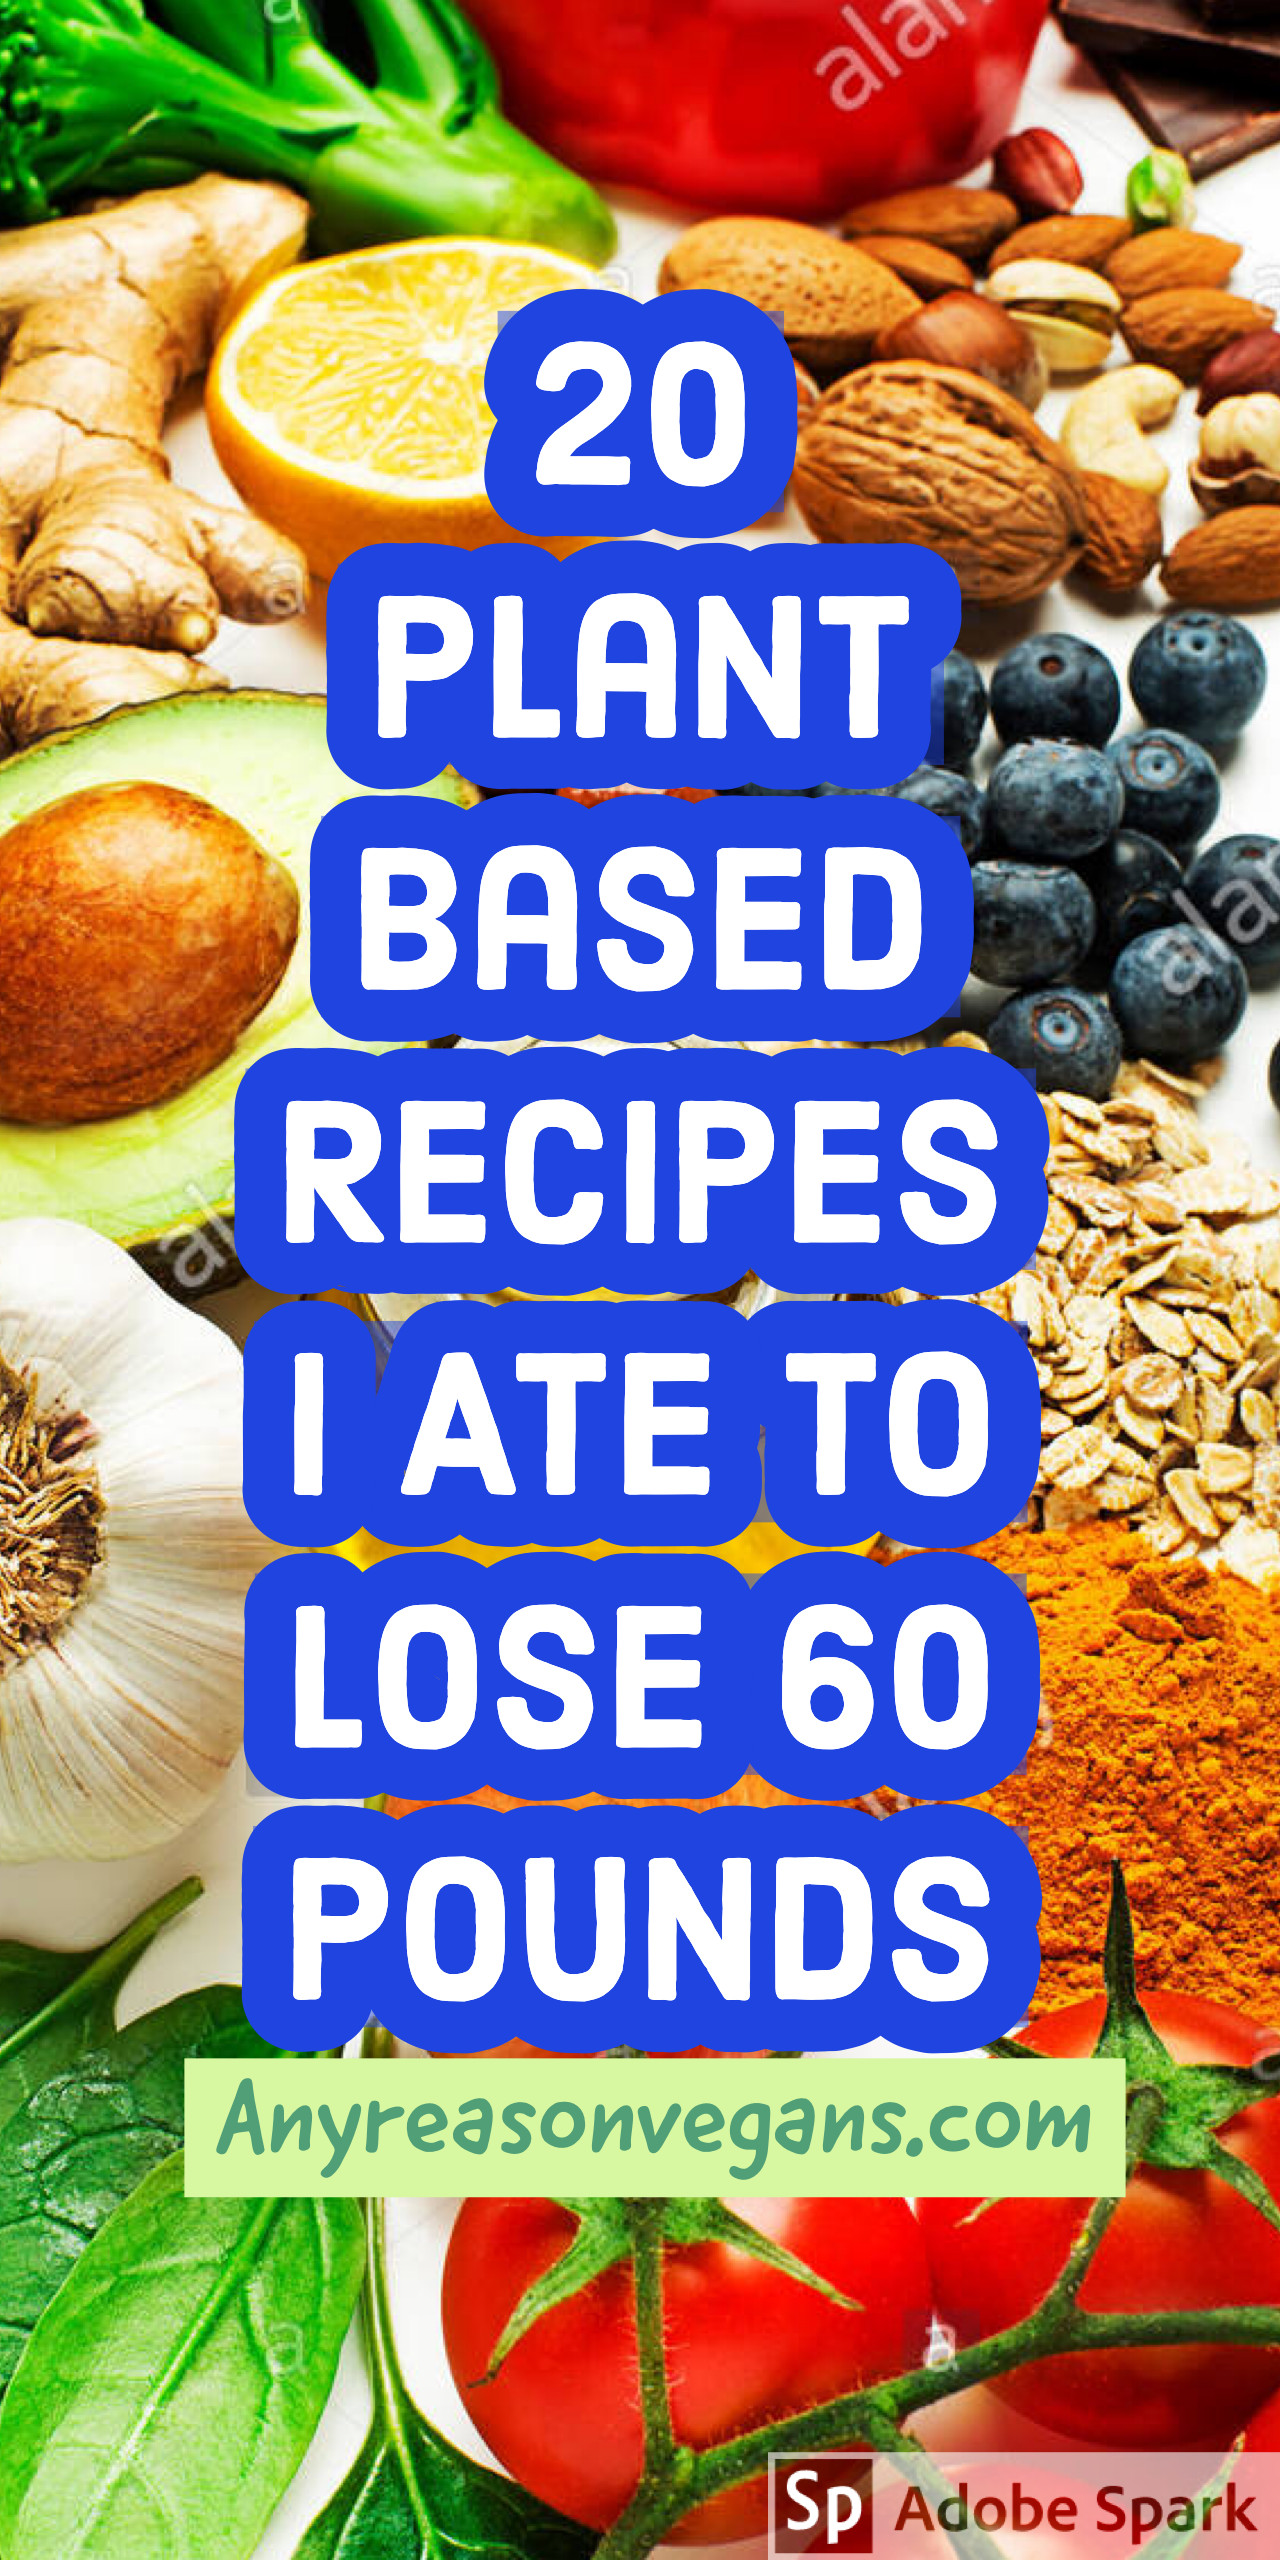 Low Calorie Plant Based Recipes
 Get these 20 Plant Based Recipes I Ate To Lose 60 LBS for